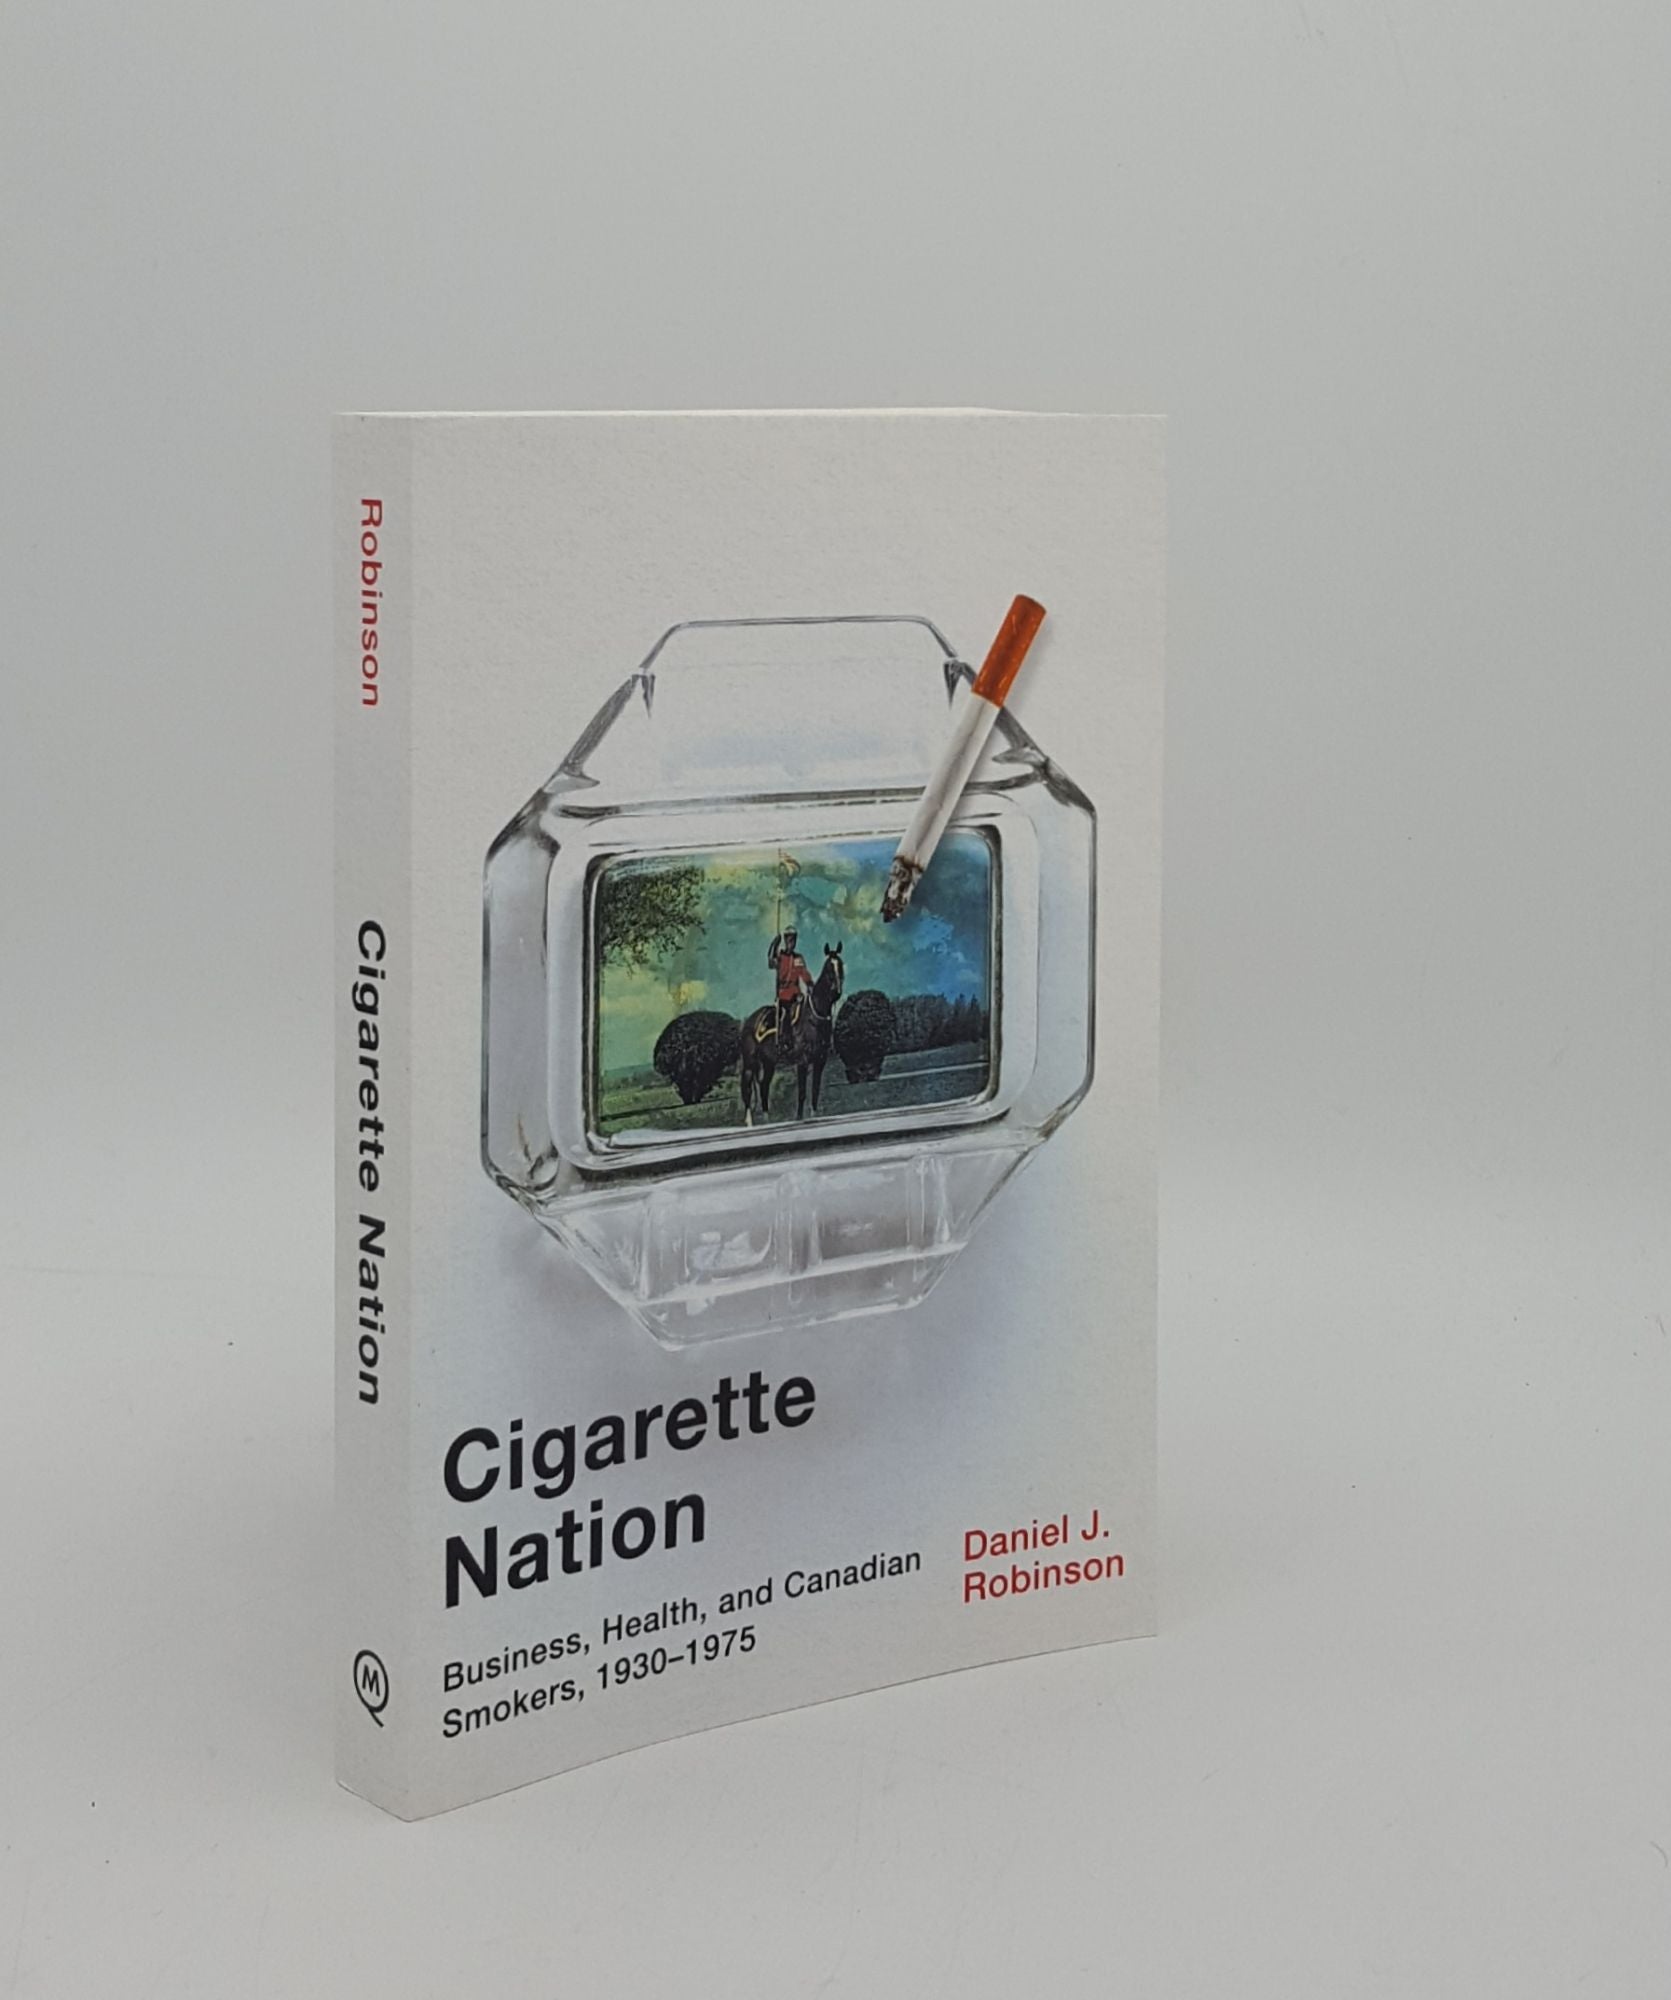 ROBINSON Daniel J. - Cigarette Nation Business Health and Canadian Smokers 1930-1975